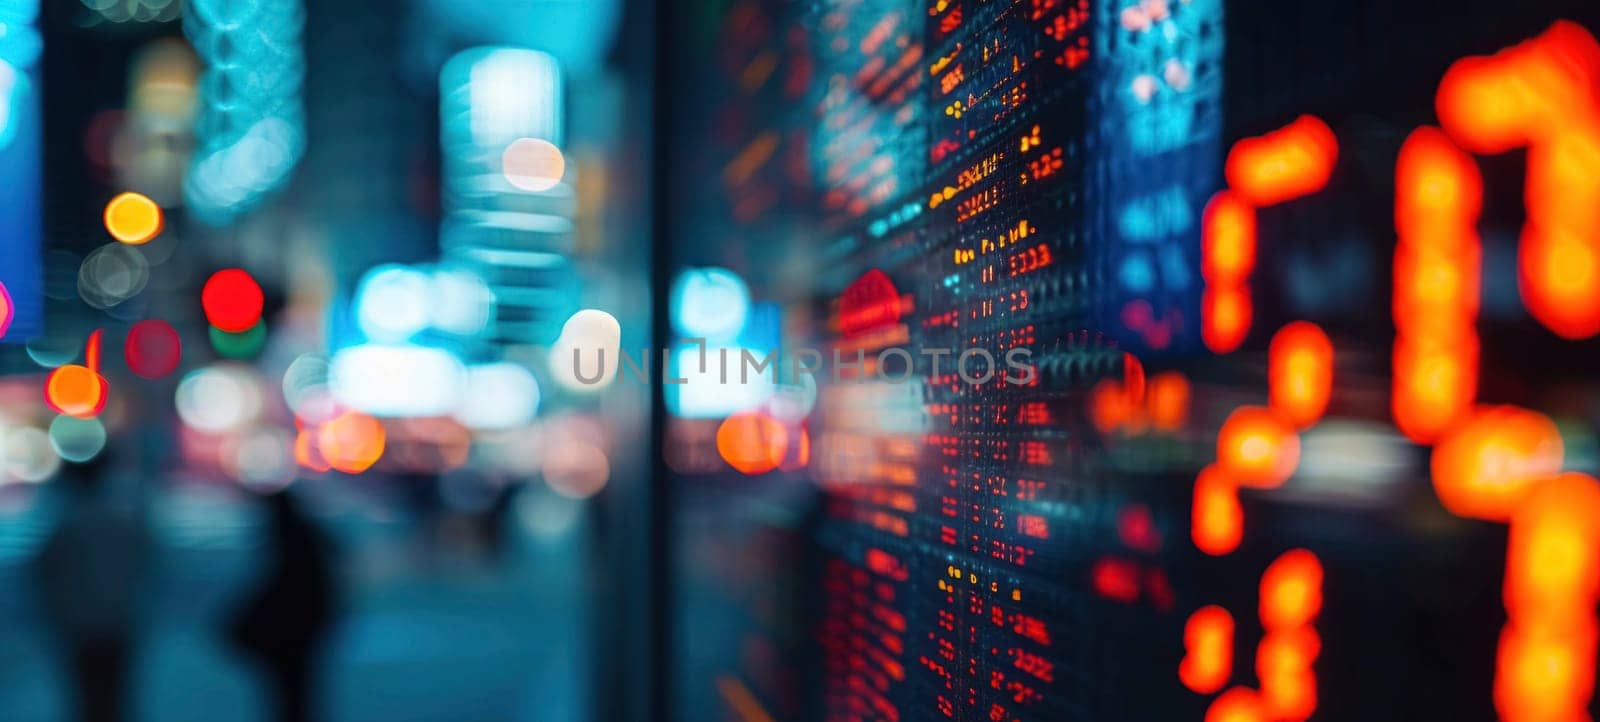 Abstract financial concept showing blurred stock market data on a digital display with city lights reflected in the background.